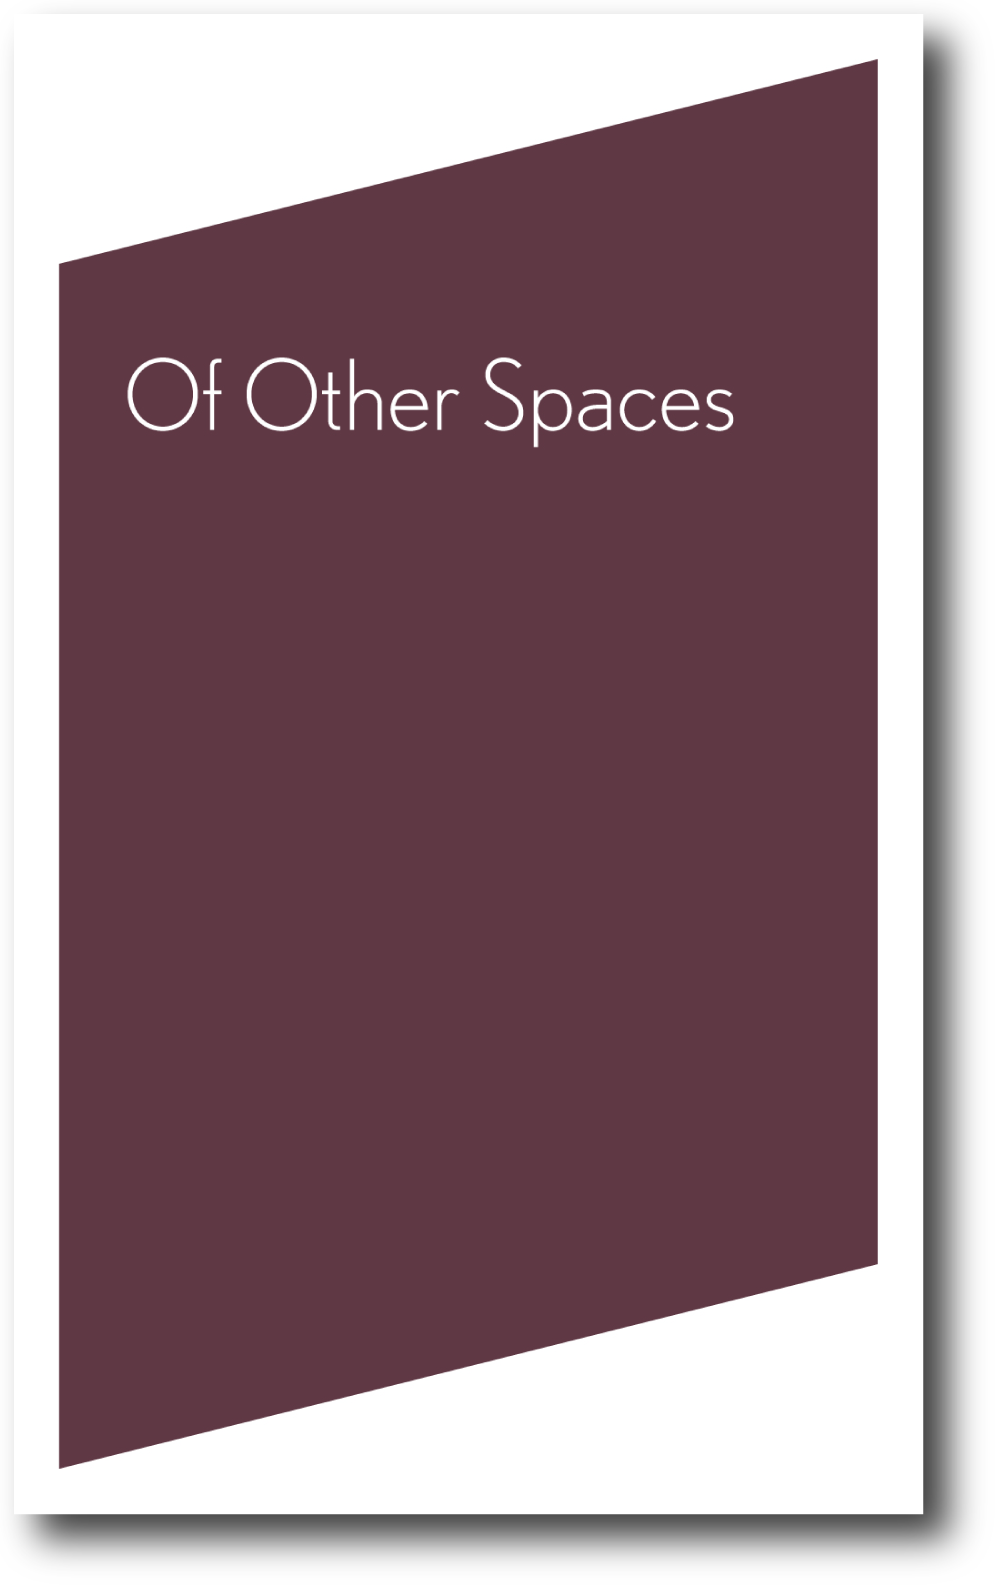   Of Other Spaces , 2009, 128 pages, 8.25 x 5 inches. 